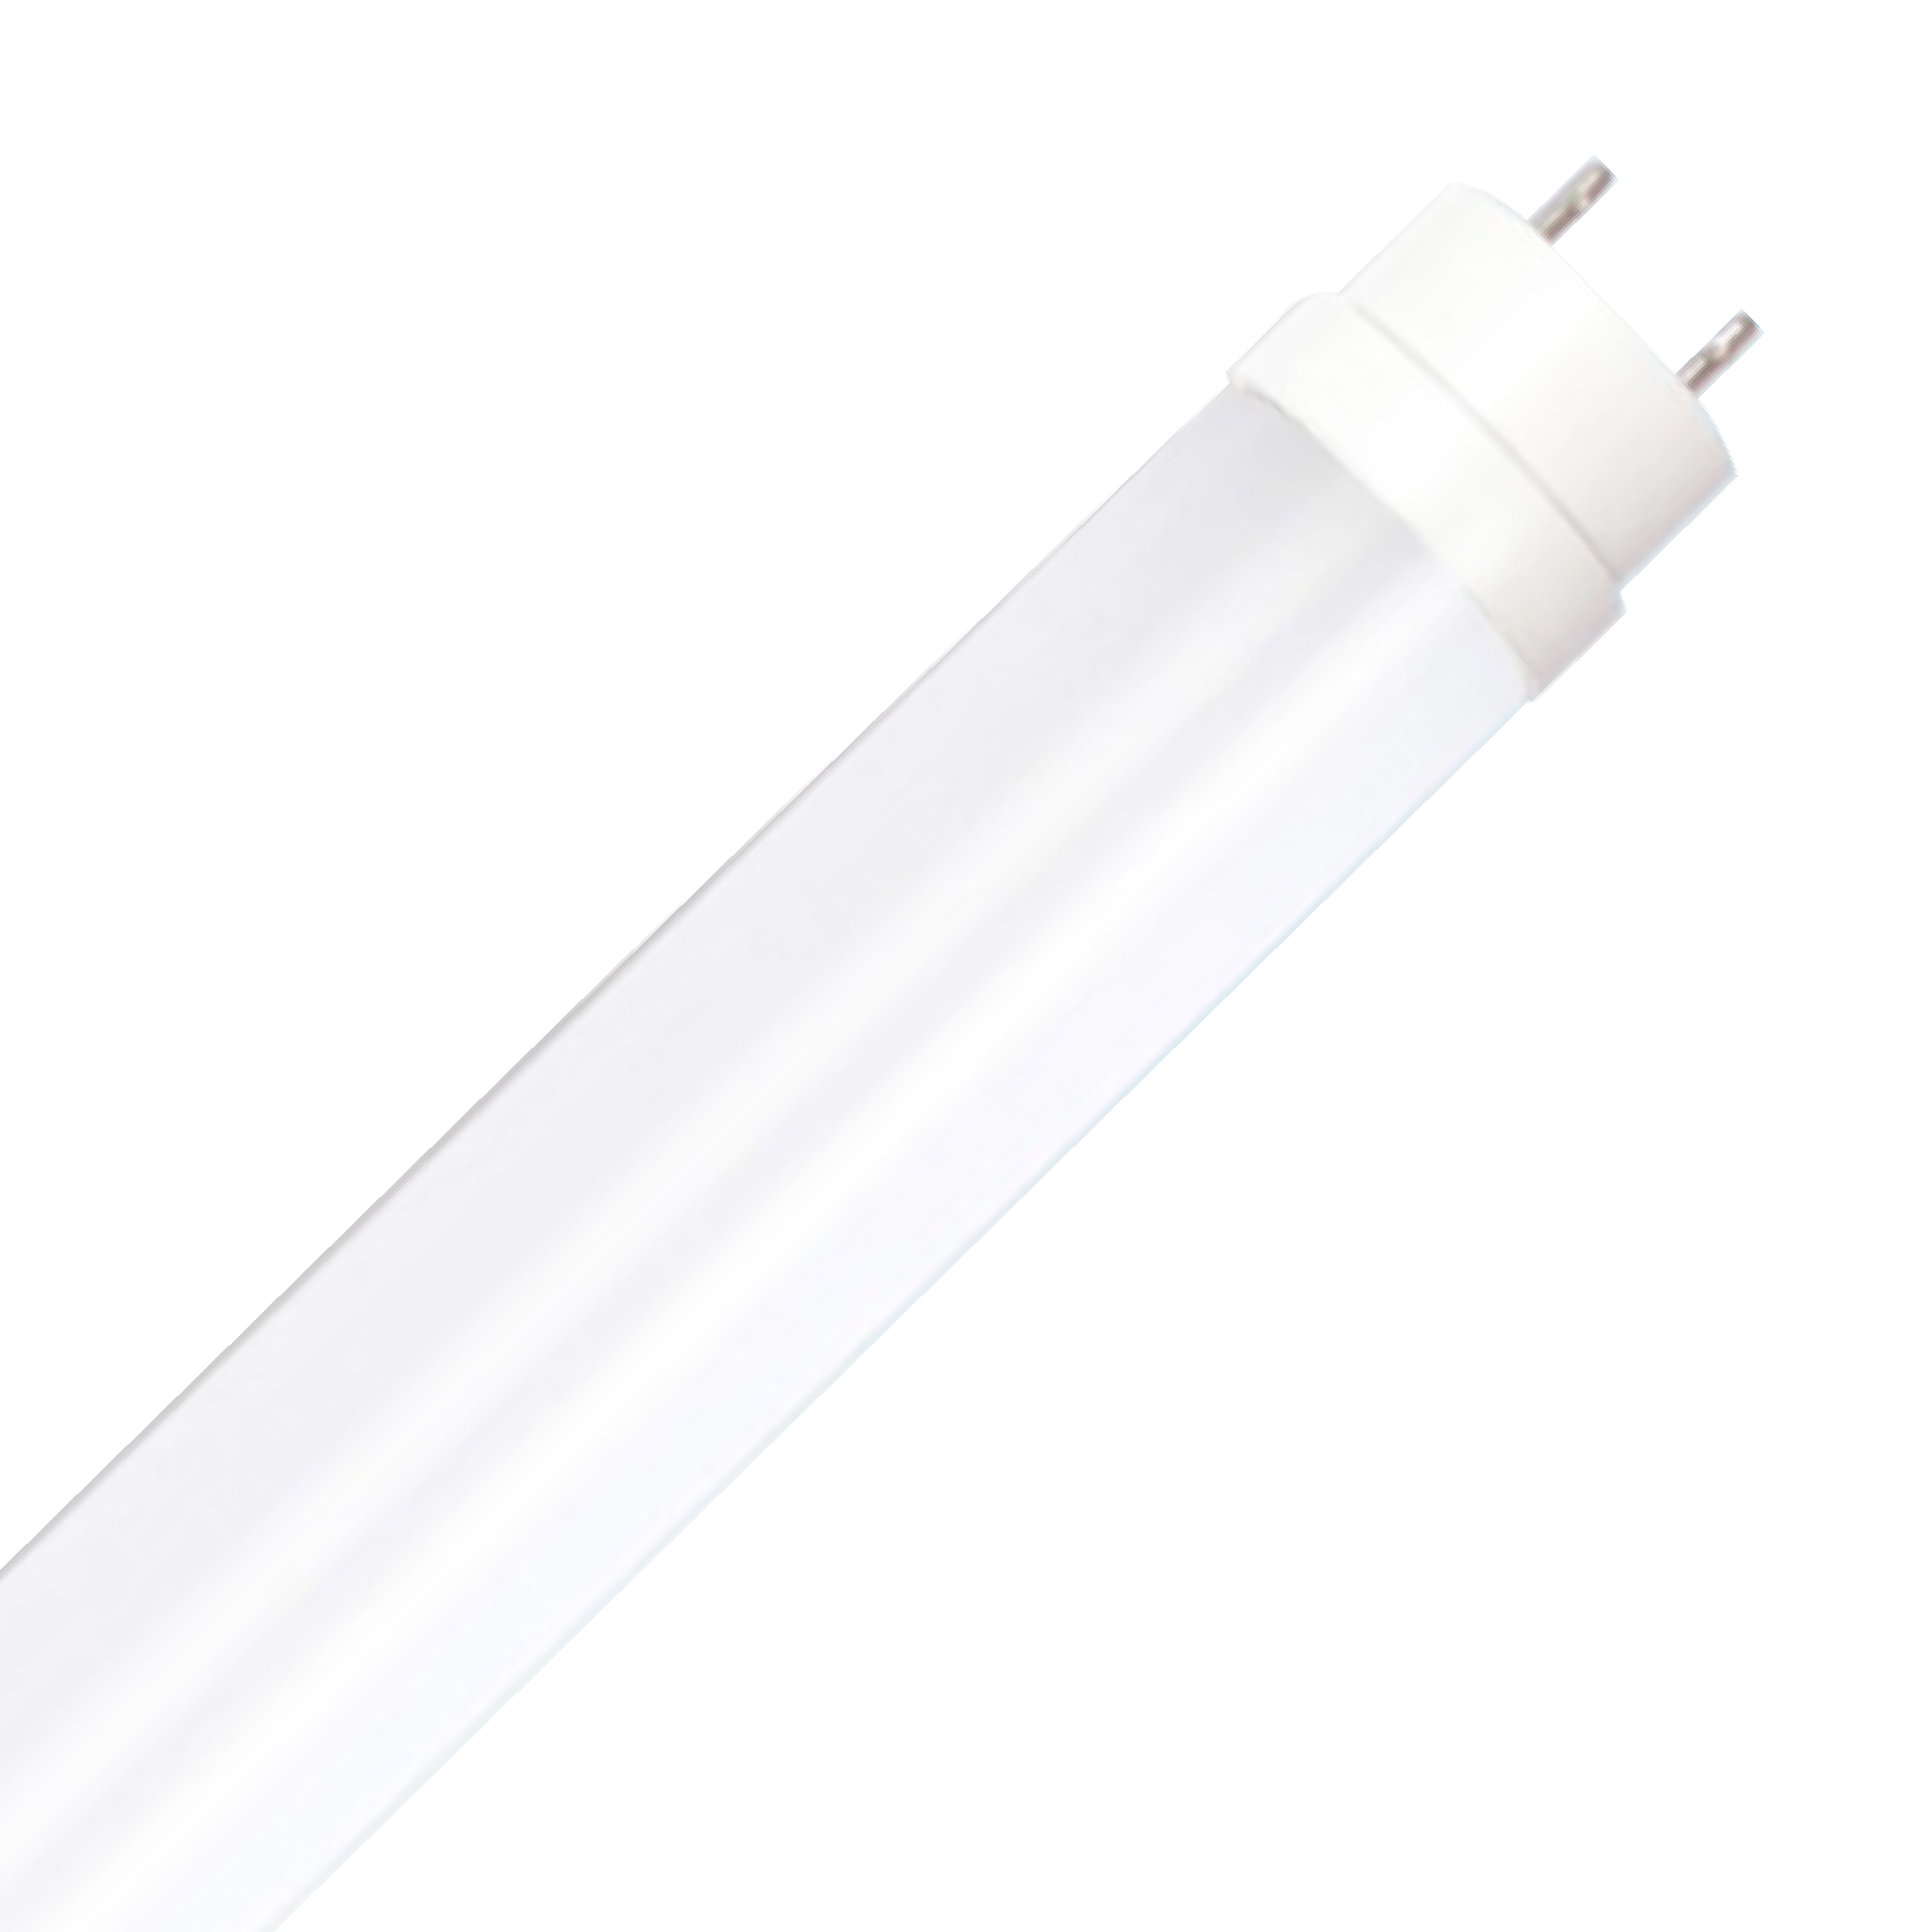 T8 LED Tube, 4ft, Frosted, Plug & Play, Hybrid Type A+B, 14W, 1800 Lumens